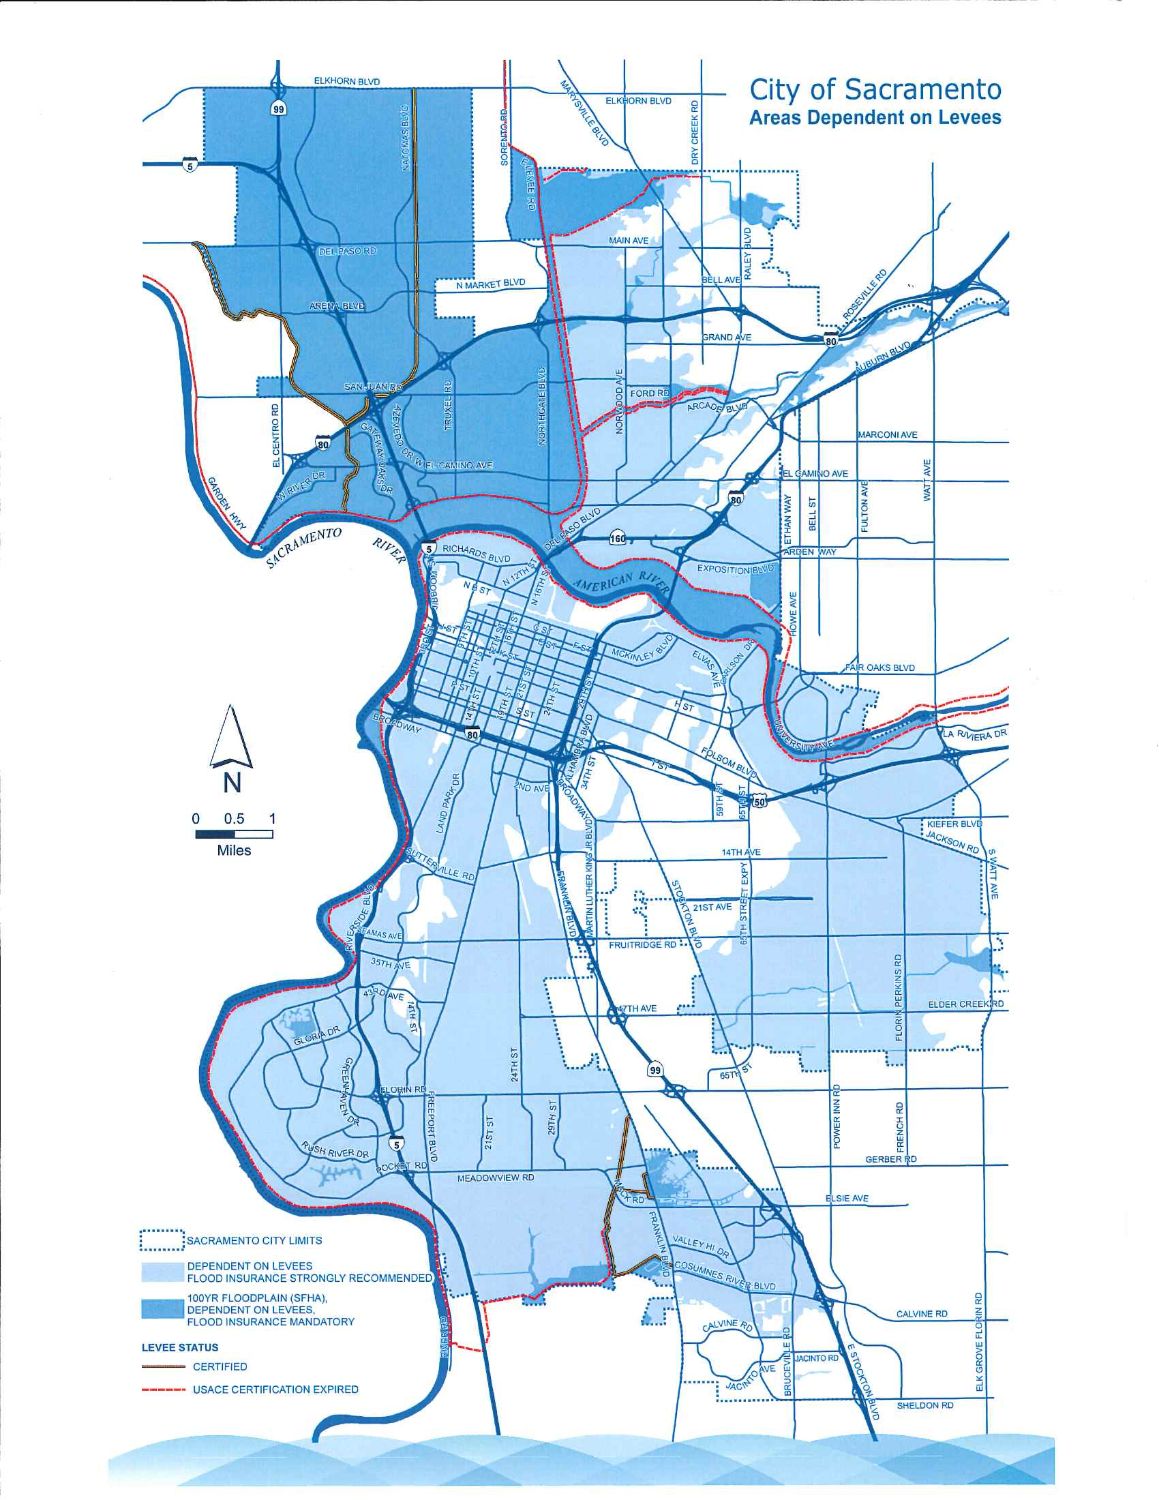 Areas dependent on levees map